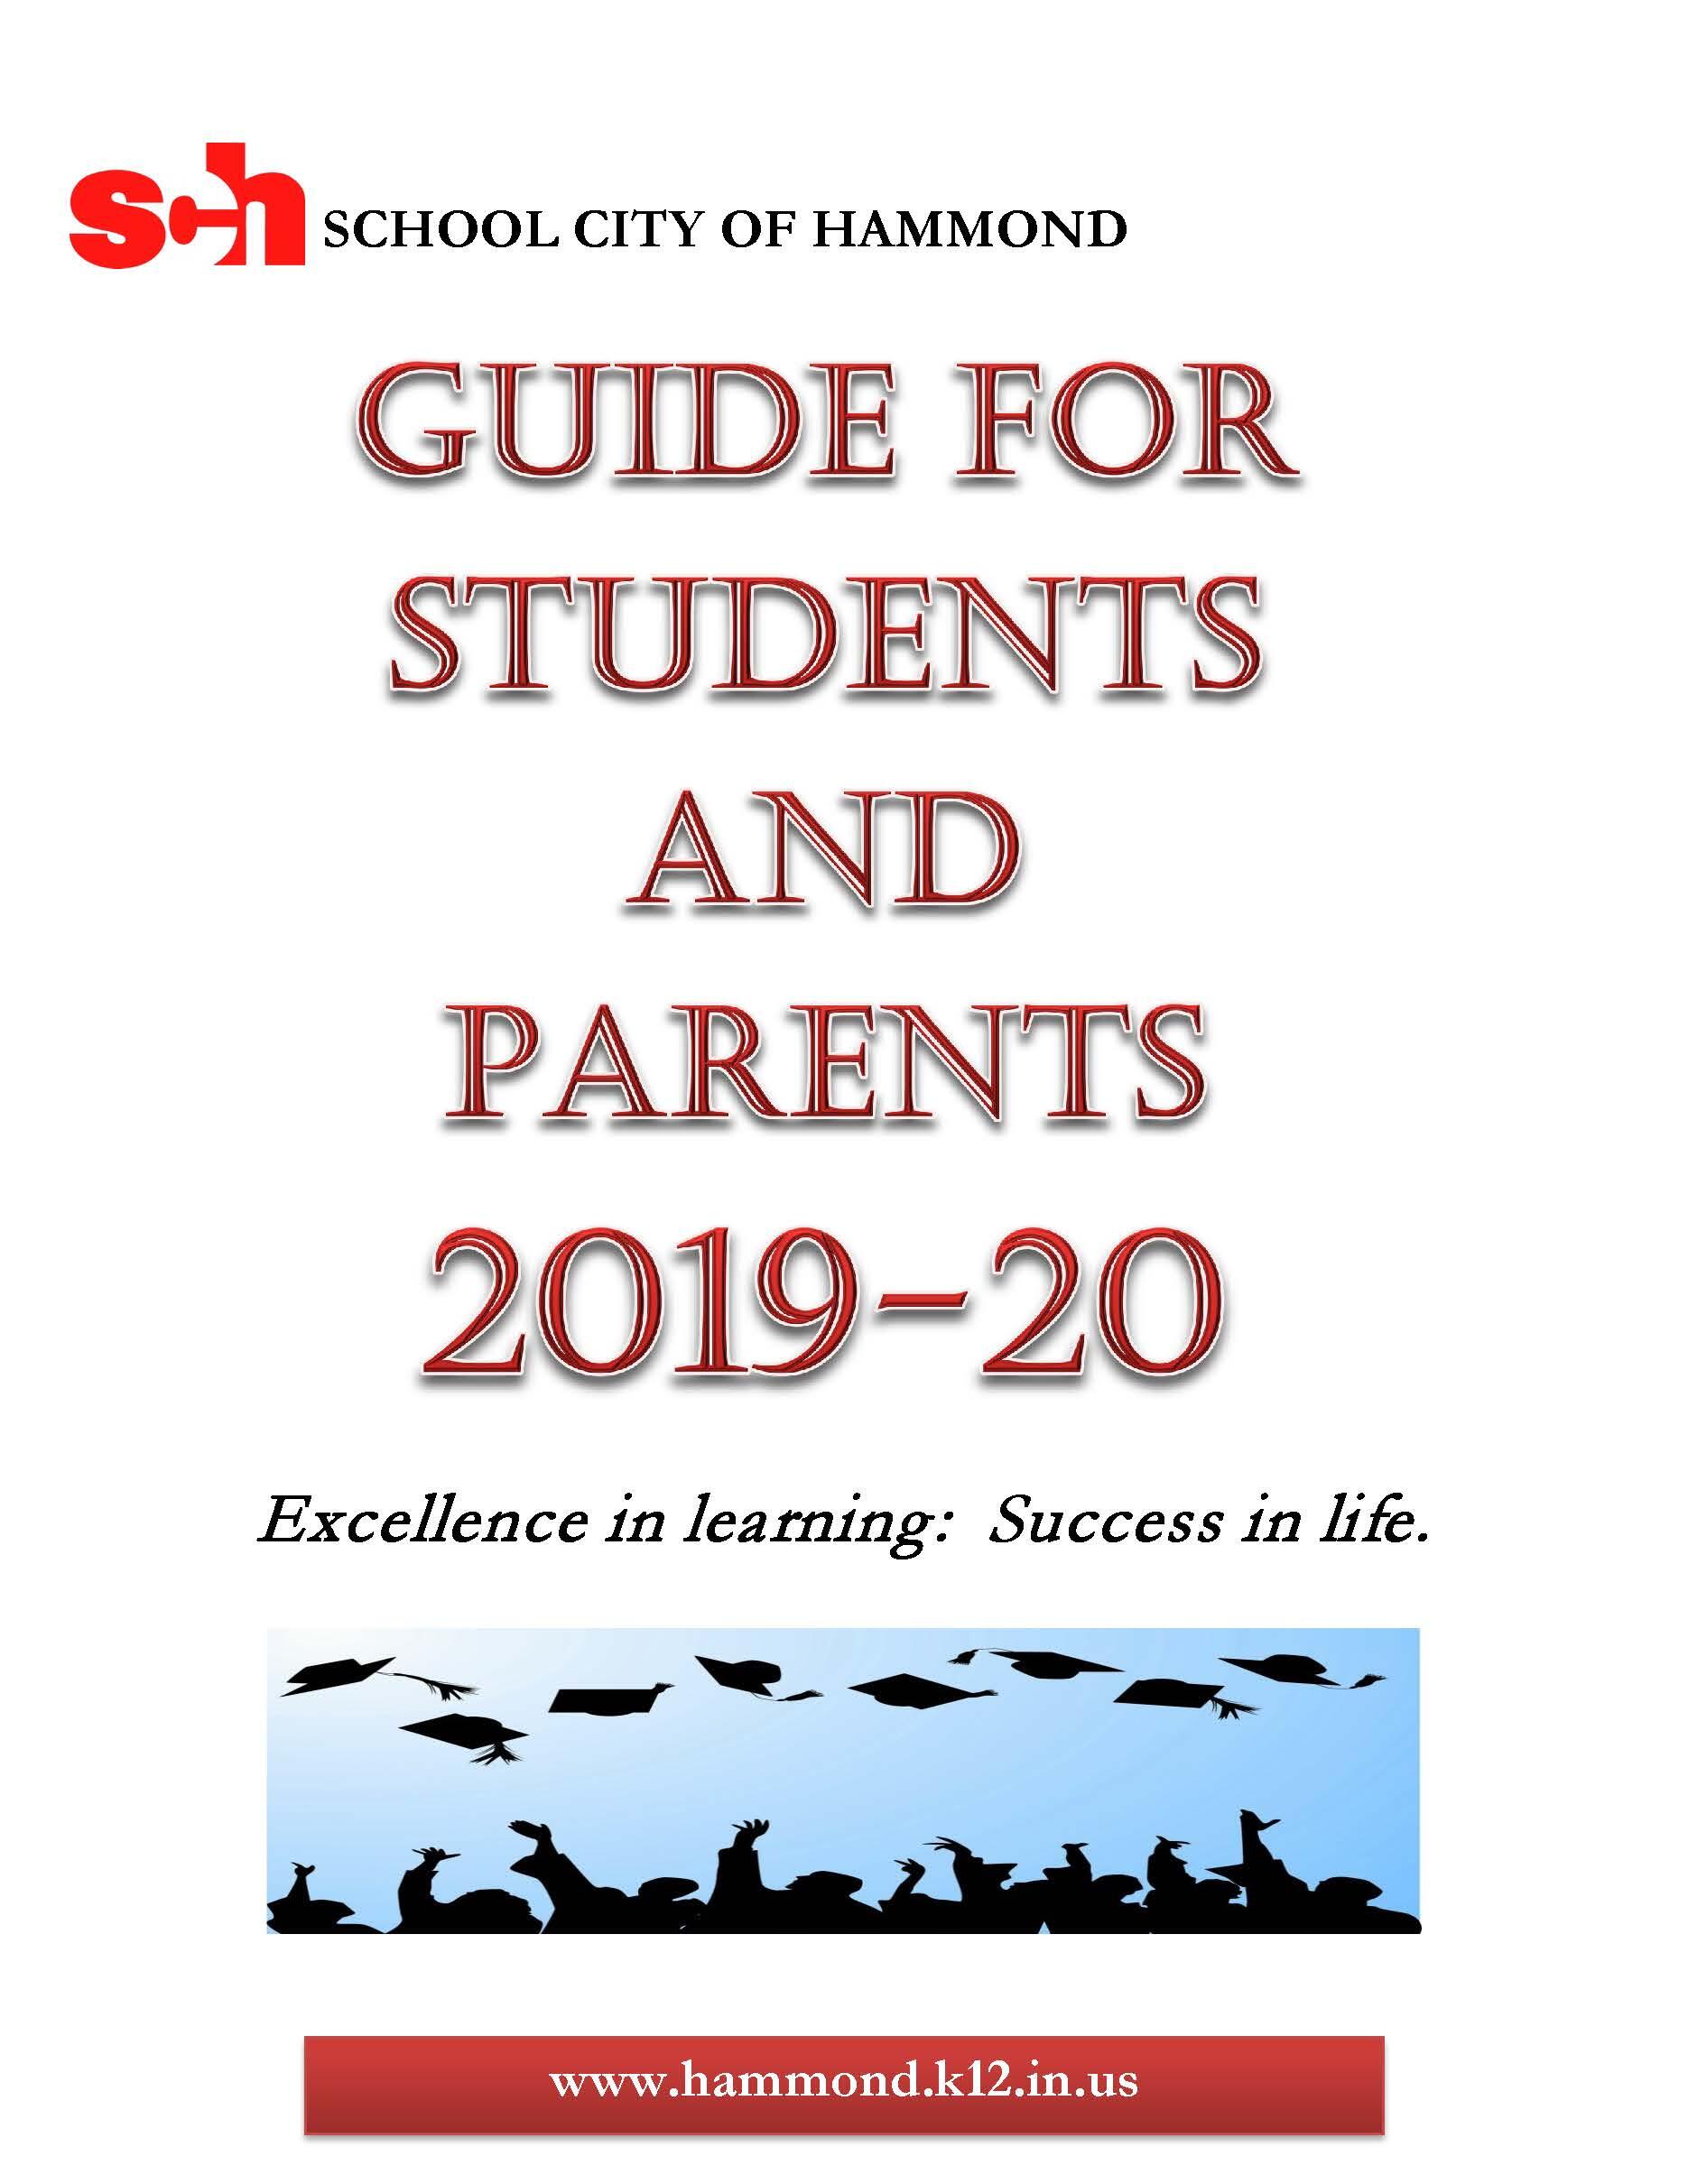 Guide For Students and Parents 2019-2020 - English